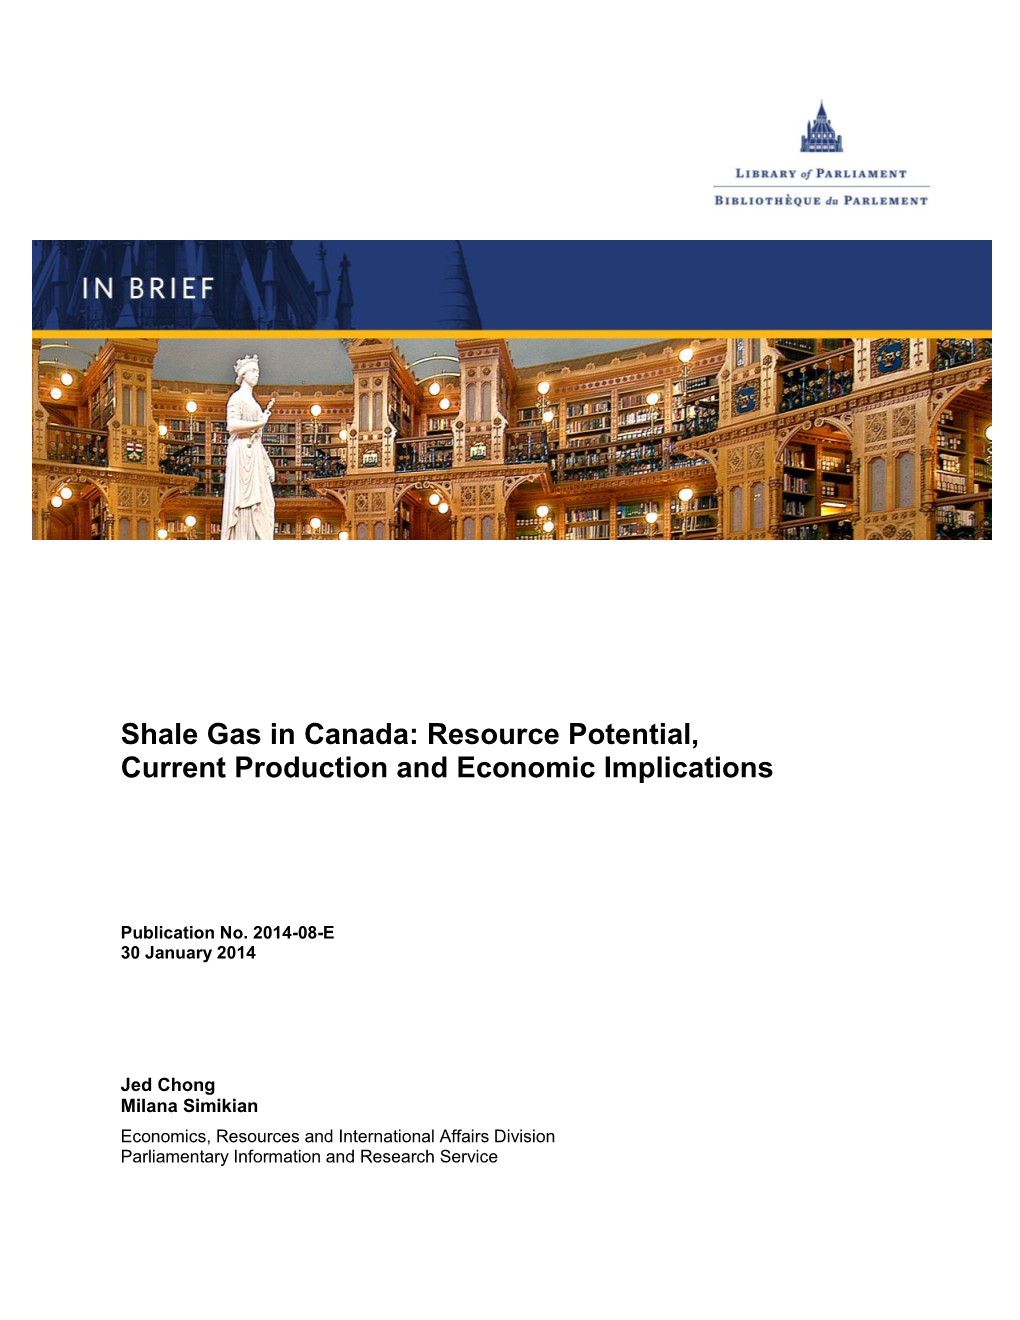 Shale Gas in Canada: Resource Potential, Current Production and Economic Implications